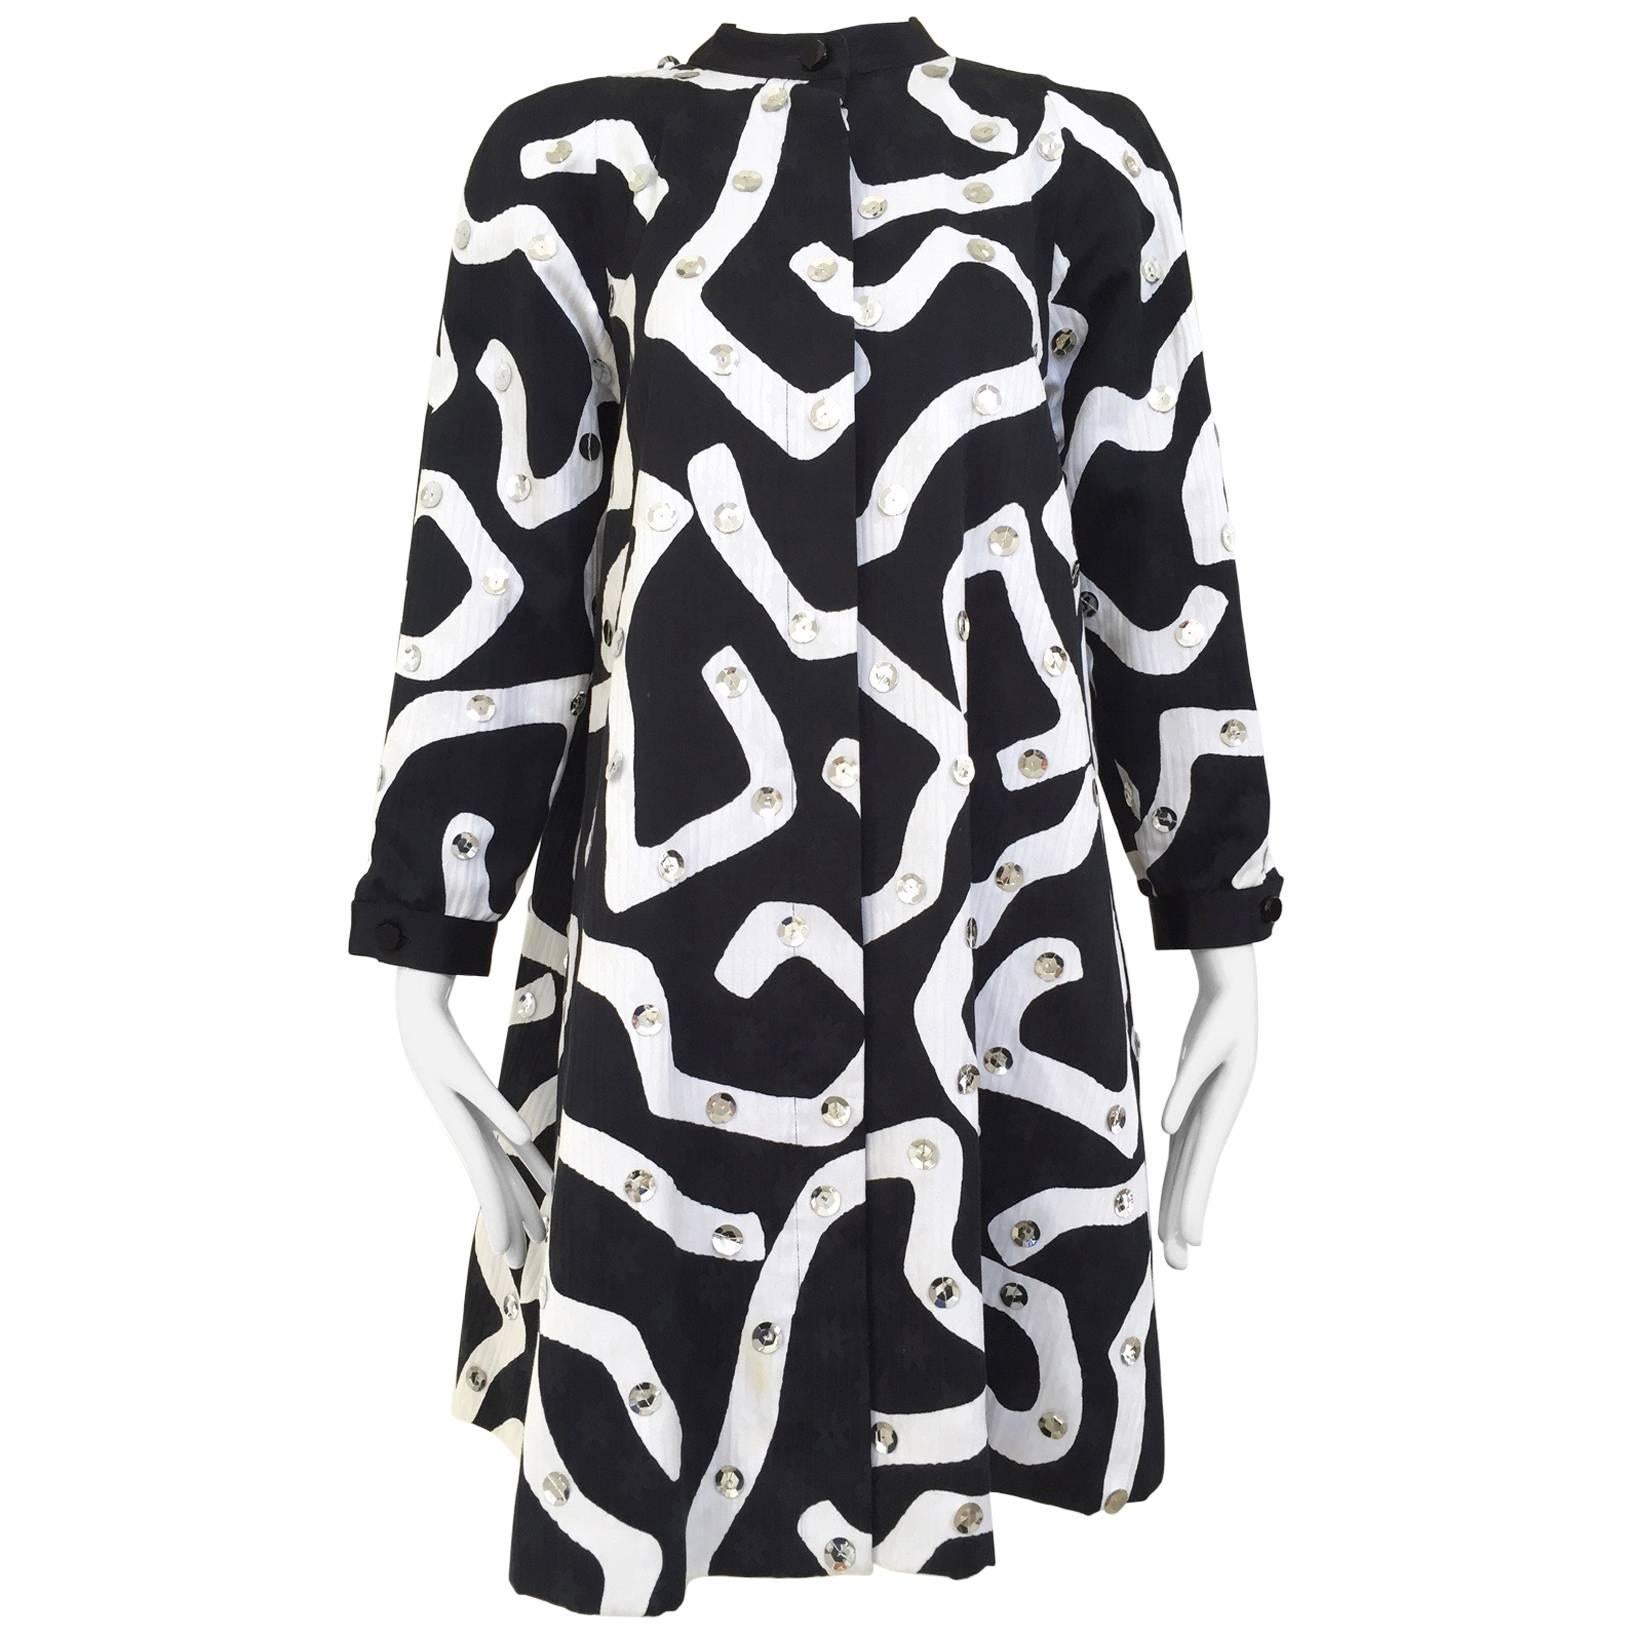 1980s Geoffrey Beene Blaack and White Abstract Print Cotton Dress